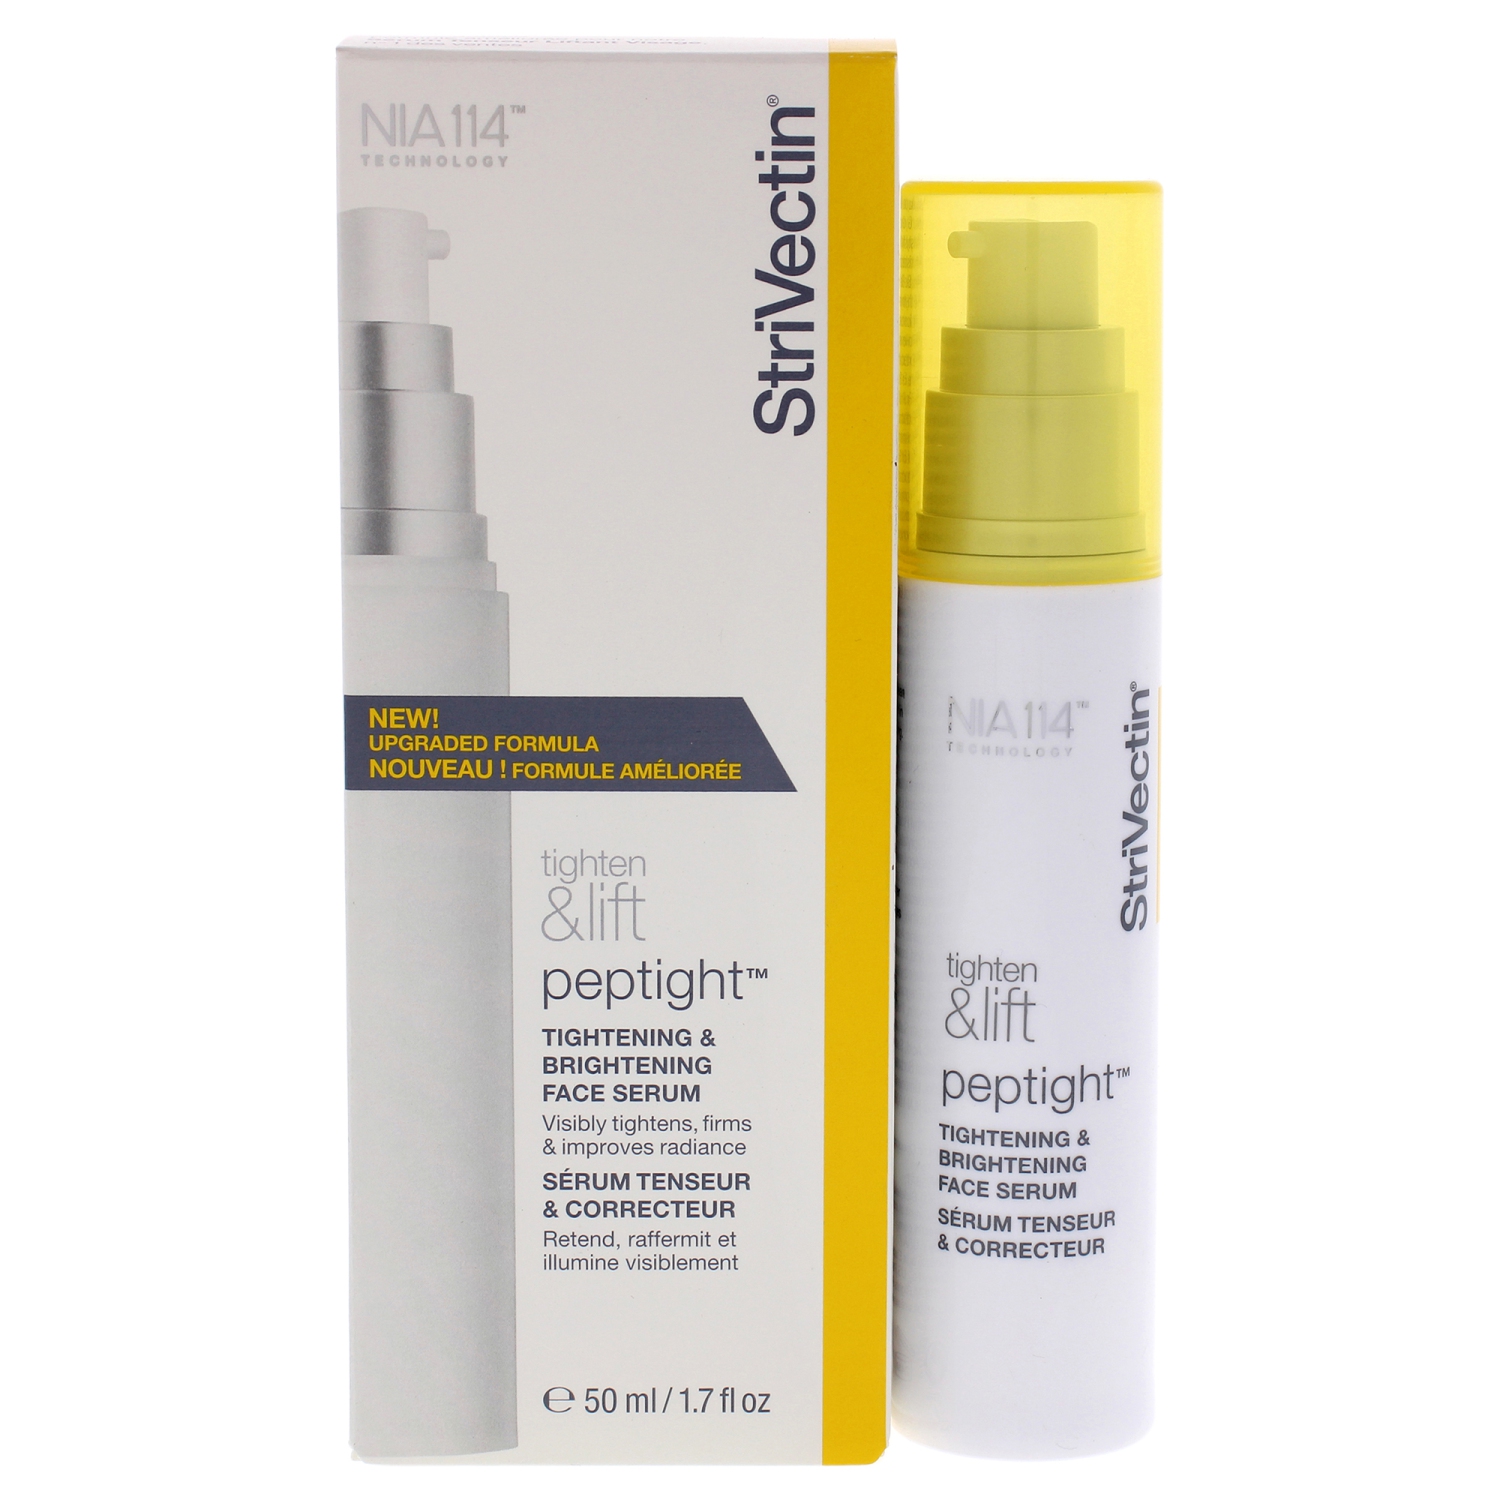 Peptight Tightening and Brightening Face Serum by Strivectin for Unisex - 1.7 oz Serum